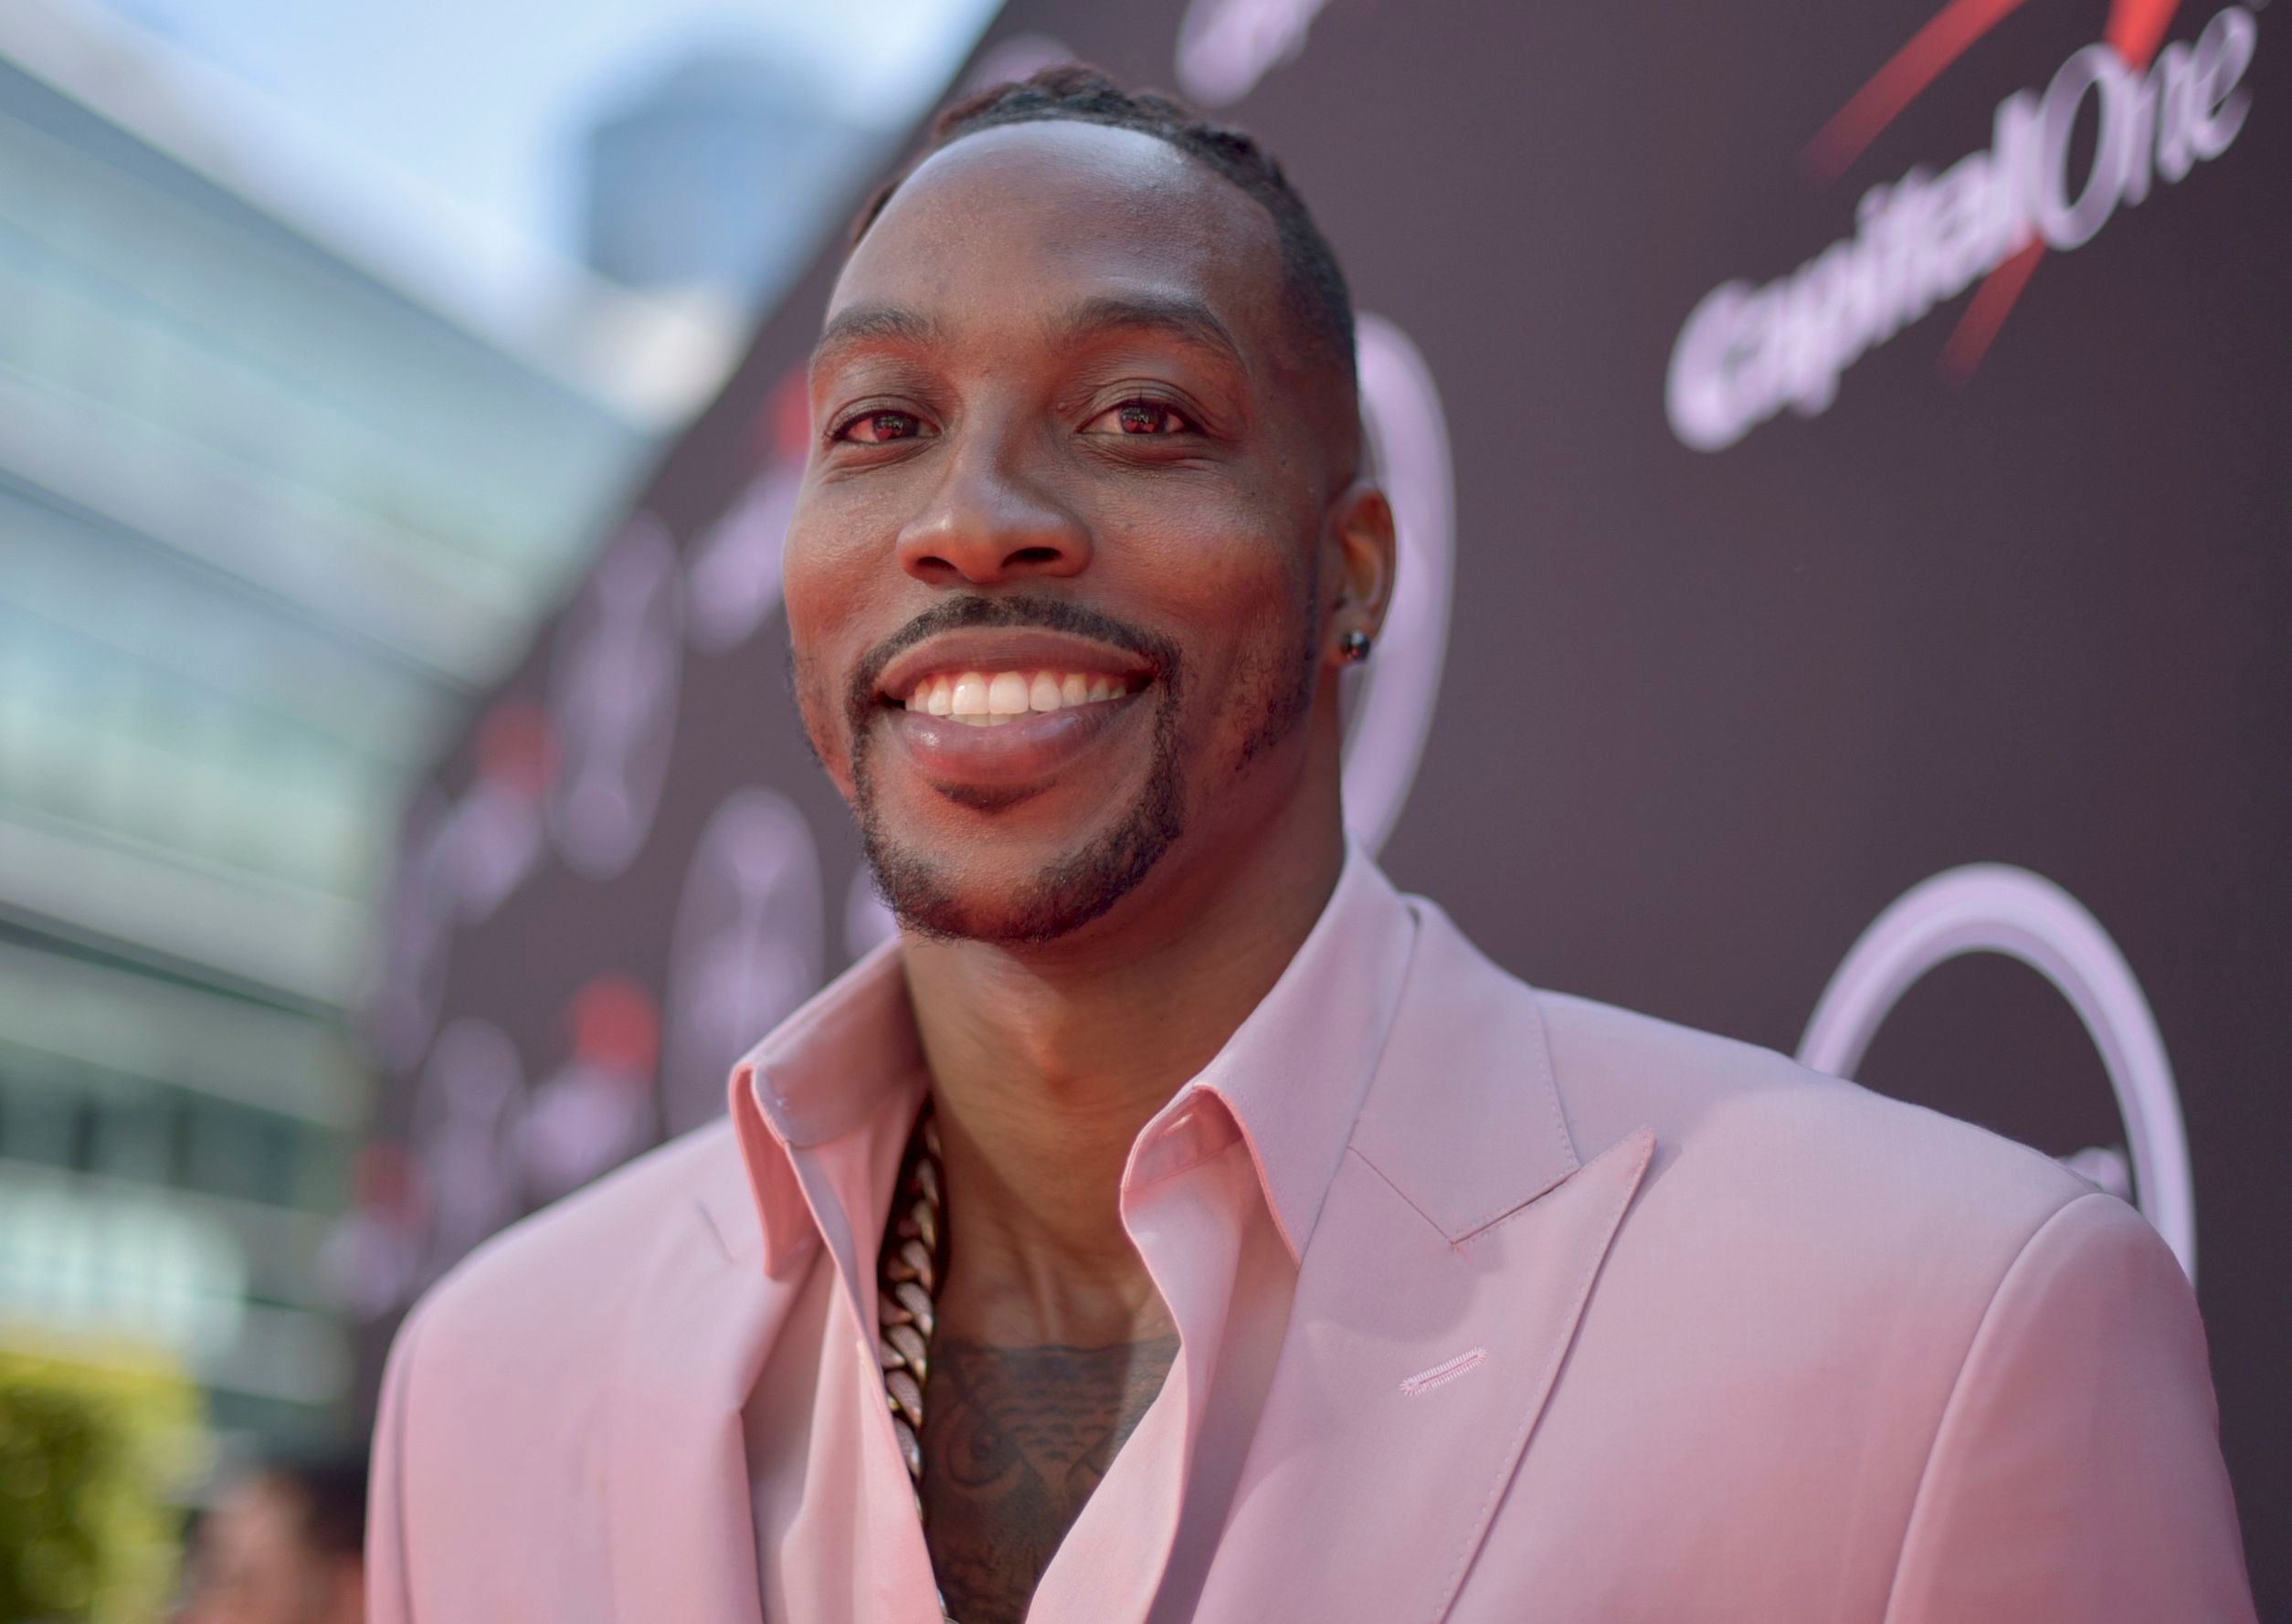 The Source |Dwight Howard Has Eyes Set On Joining WWE